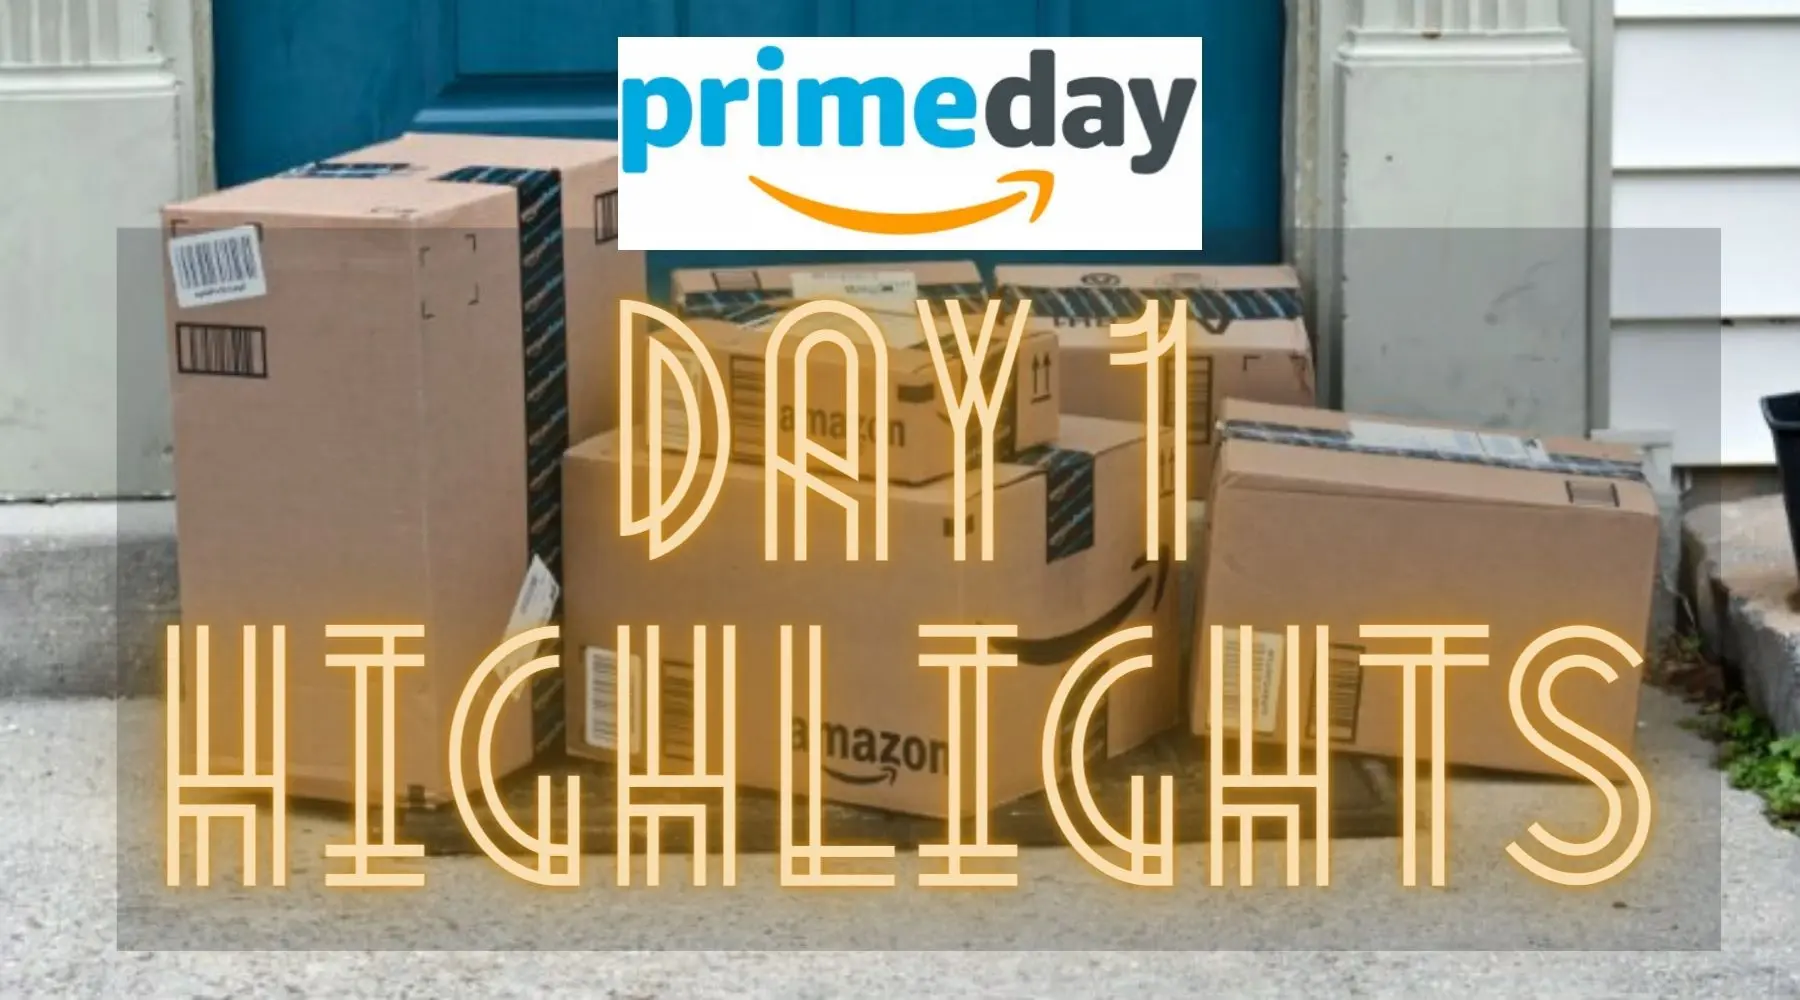 Best Prime Day deals 2021: Highlights from day one [updated]